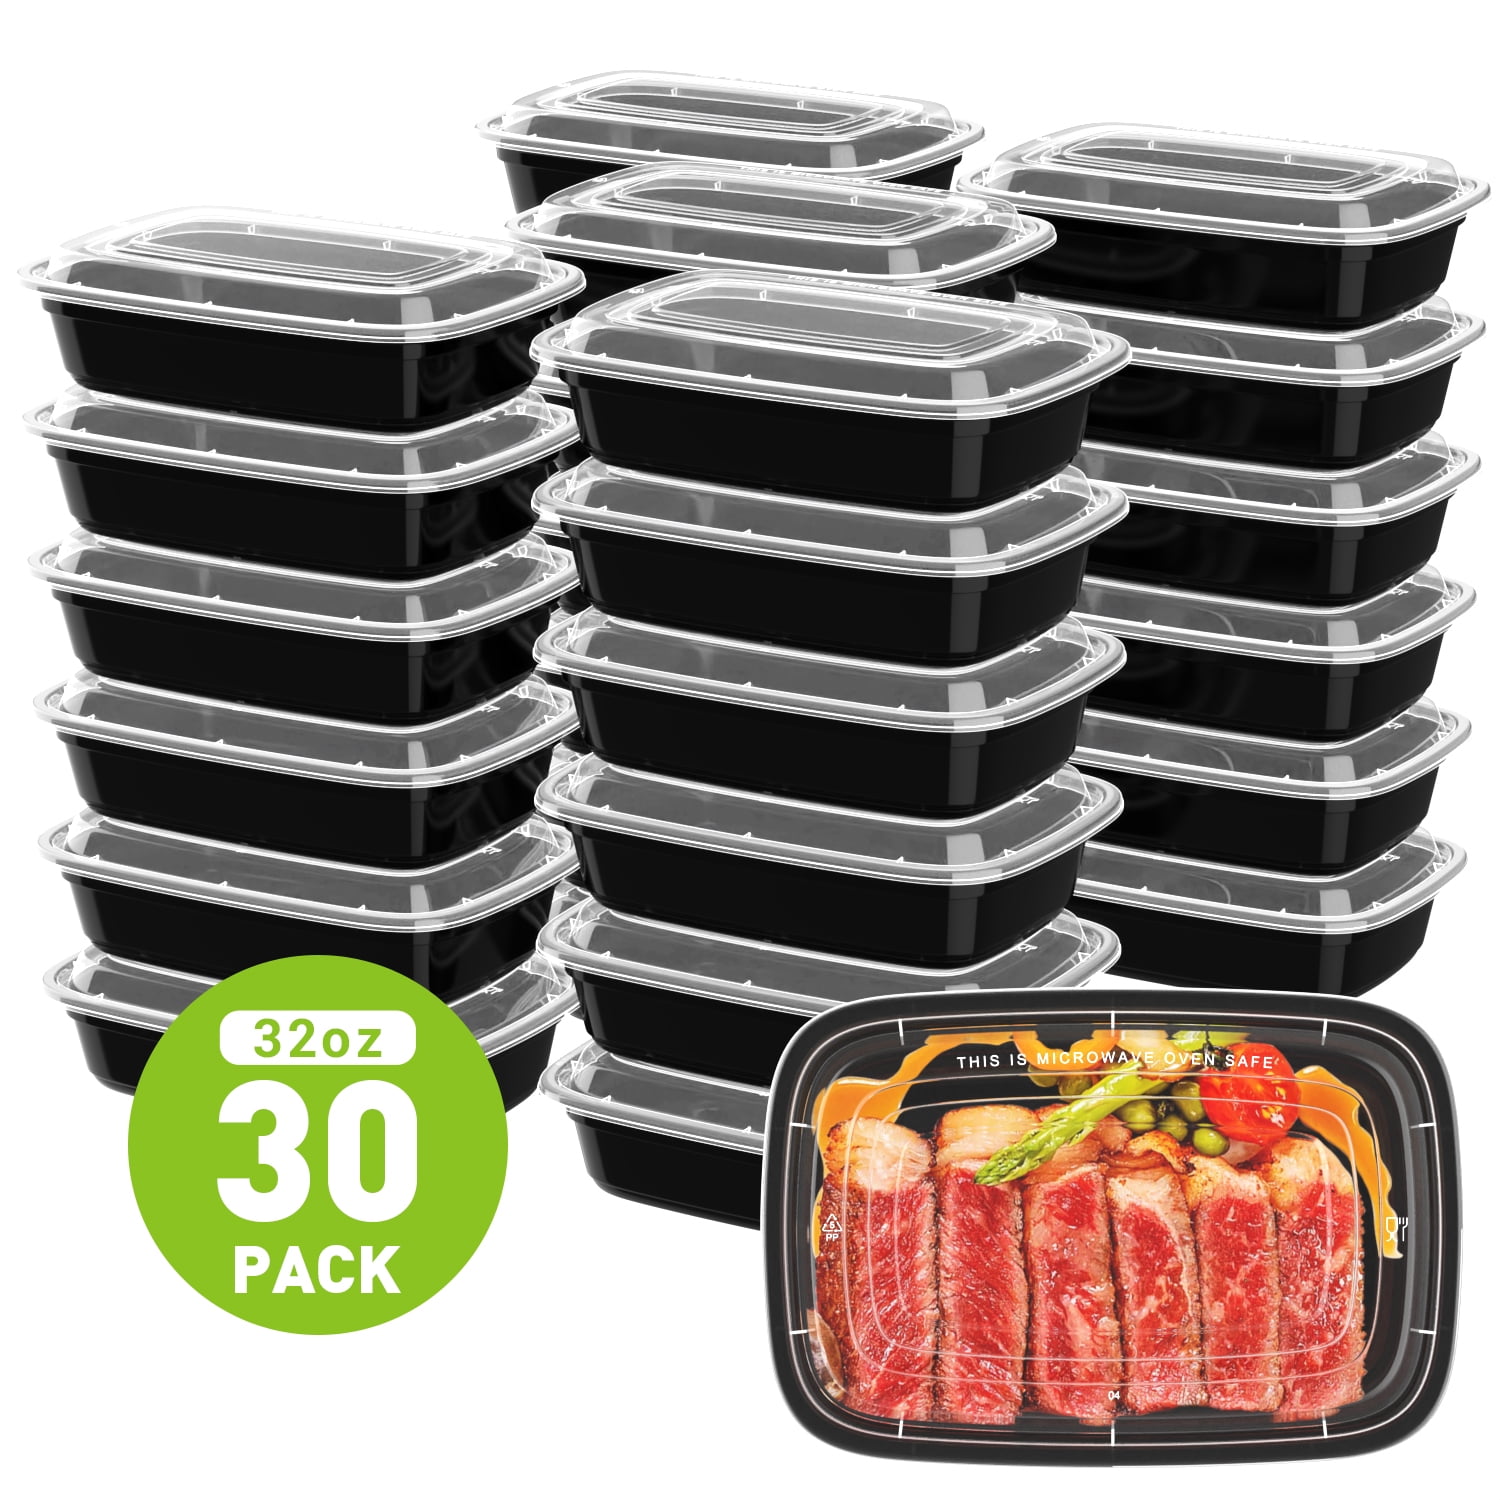 Meal Prep Container,30 Pack Food Prep Containers,28 oz Meal Prep Bowls with  Lids,Reusable Food Conta…See more Meal Prep Container,30 Pack Food Prep